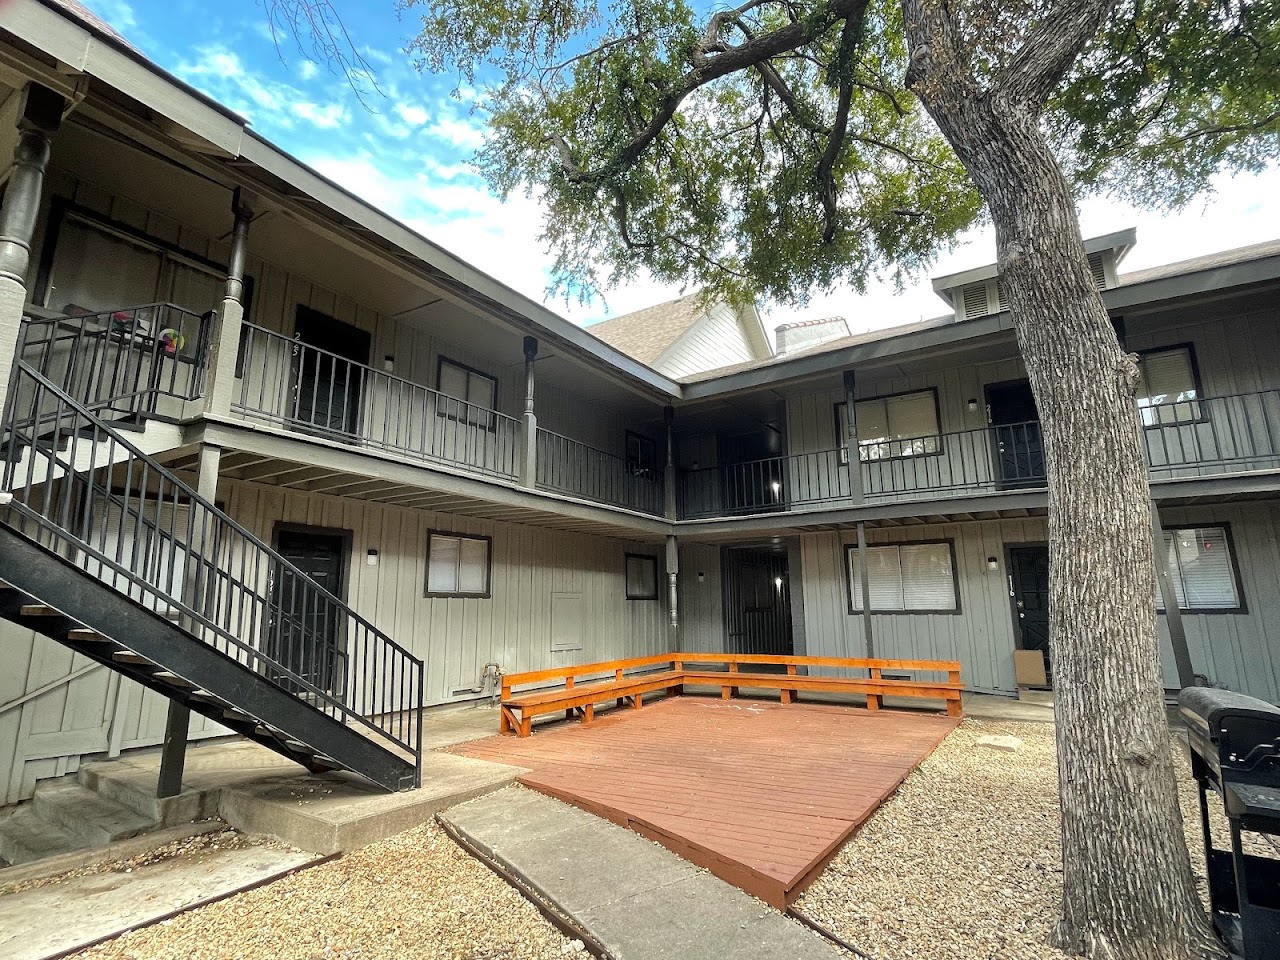 Photo of MANOR ON THE PARK. Affordable housing located at 3122 PARK LN DALLAS, TX 75220